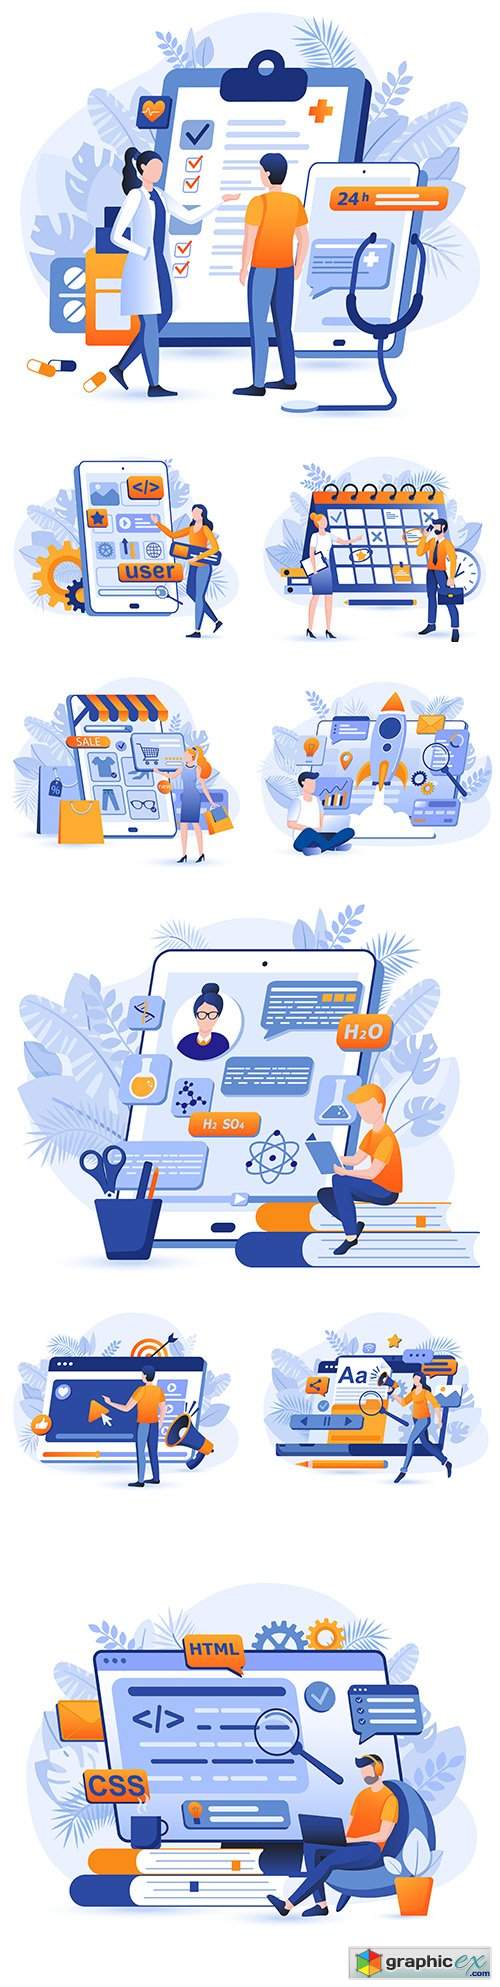  Business planning and online store flat design illustration concept 